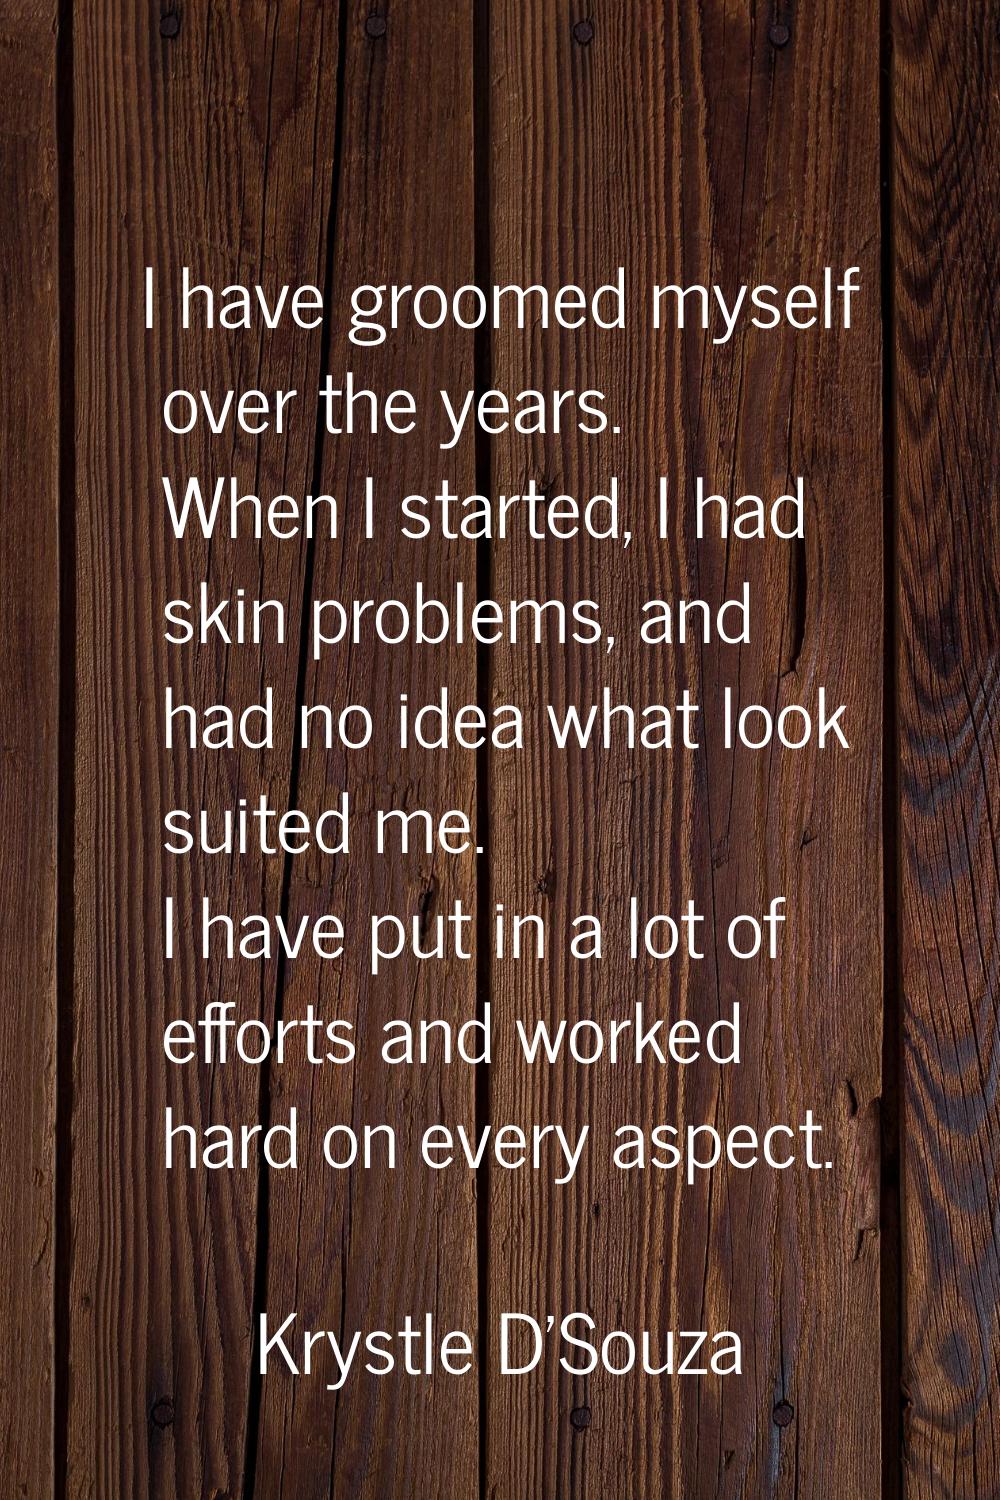 I have groomed myself over the years. When I started, I had skin problems, and had no idea what loo